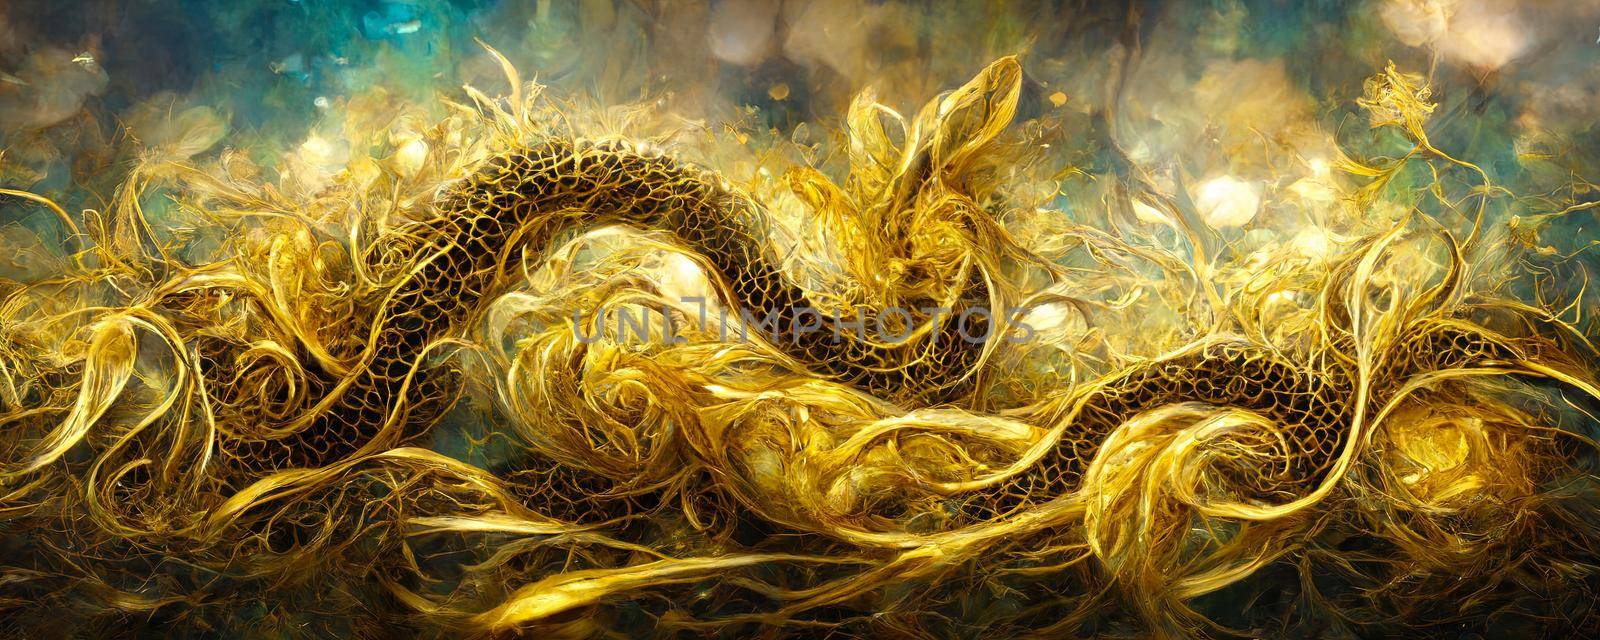 Golden Dragon, Colorful abstract wallpaper texture background illustration by TRMK